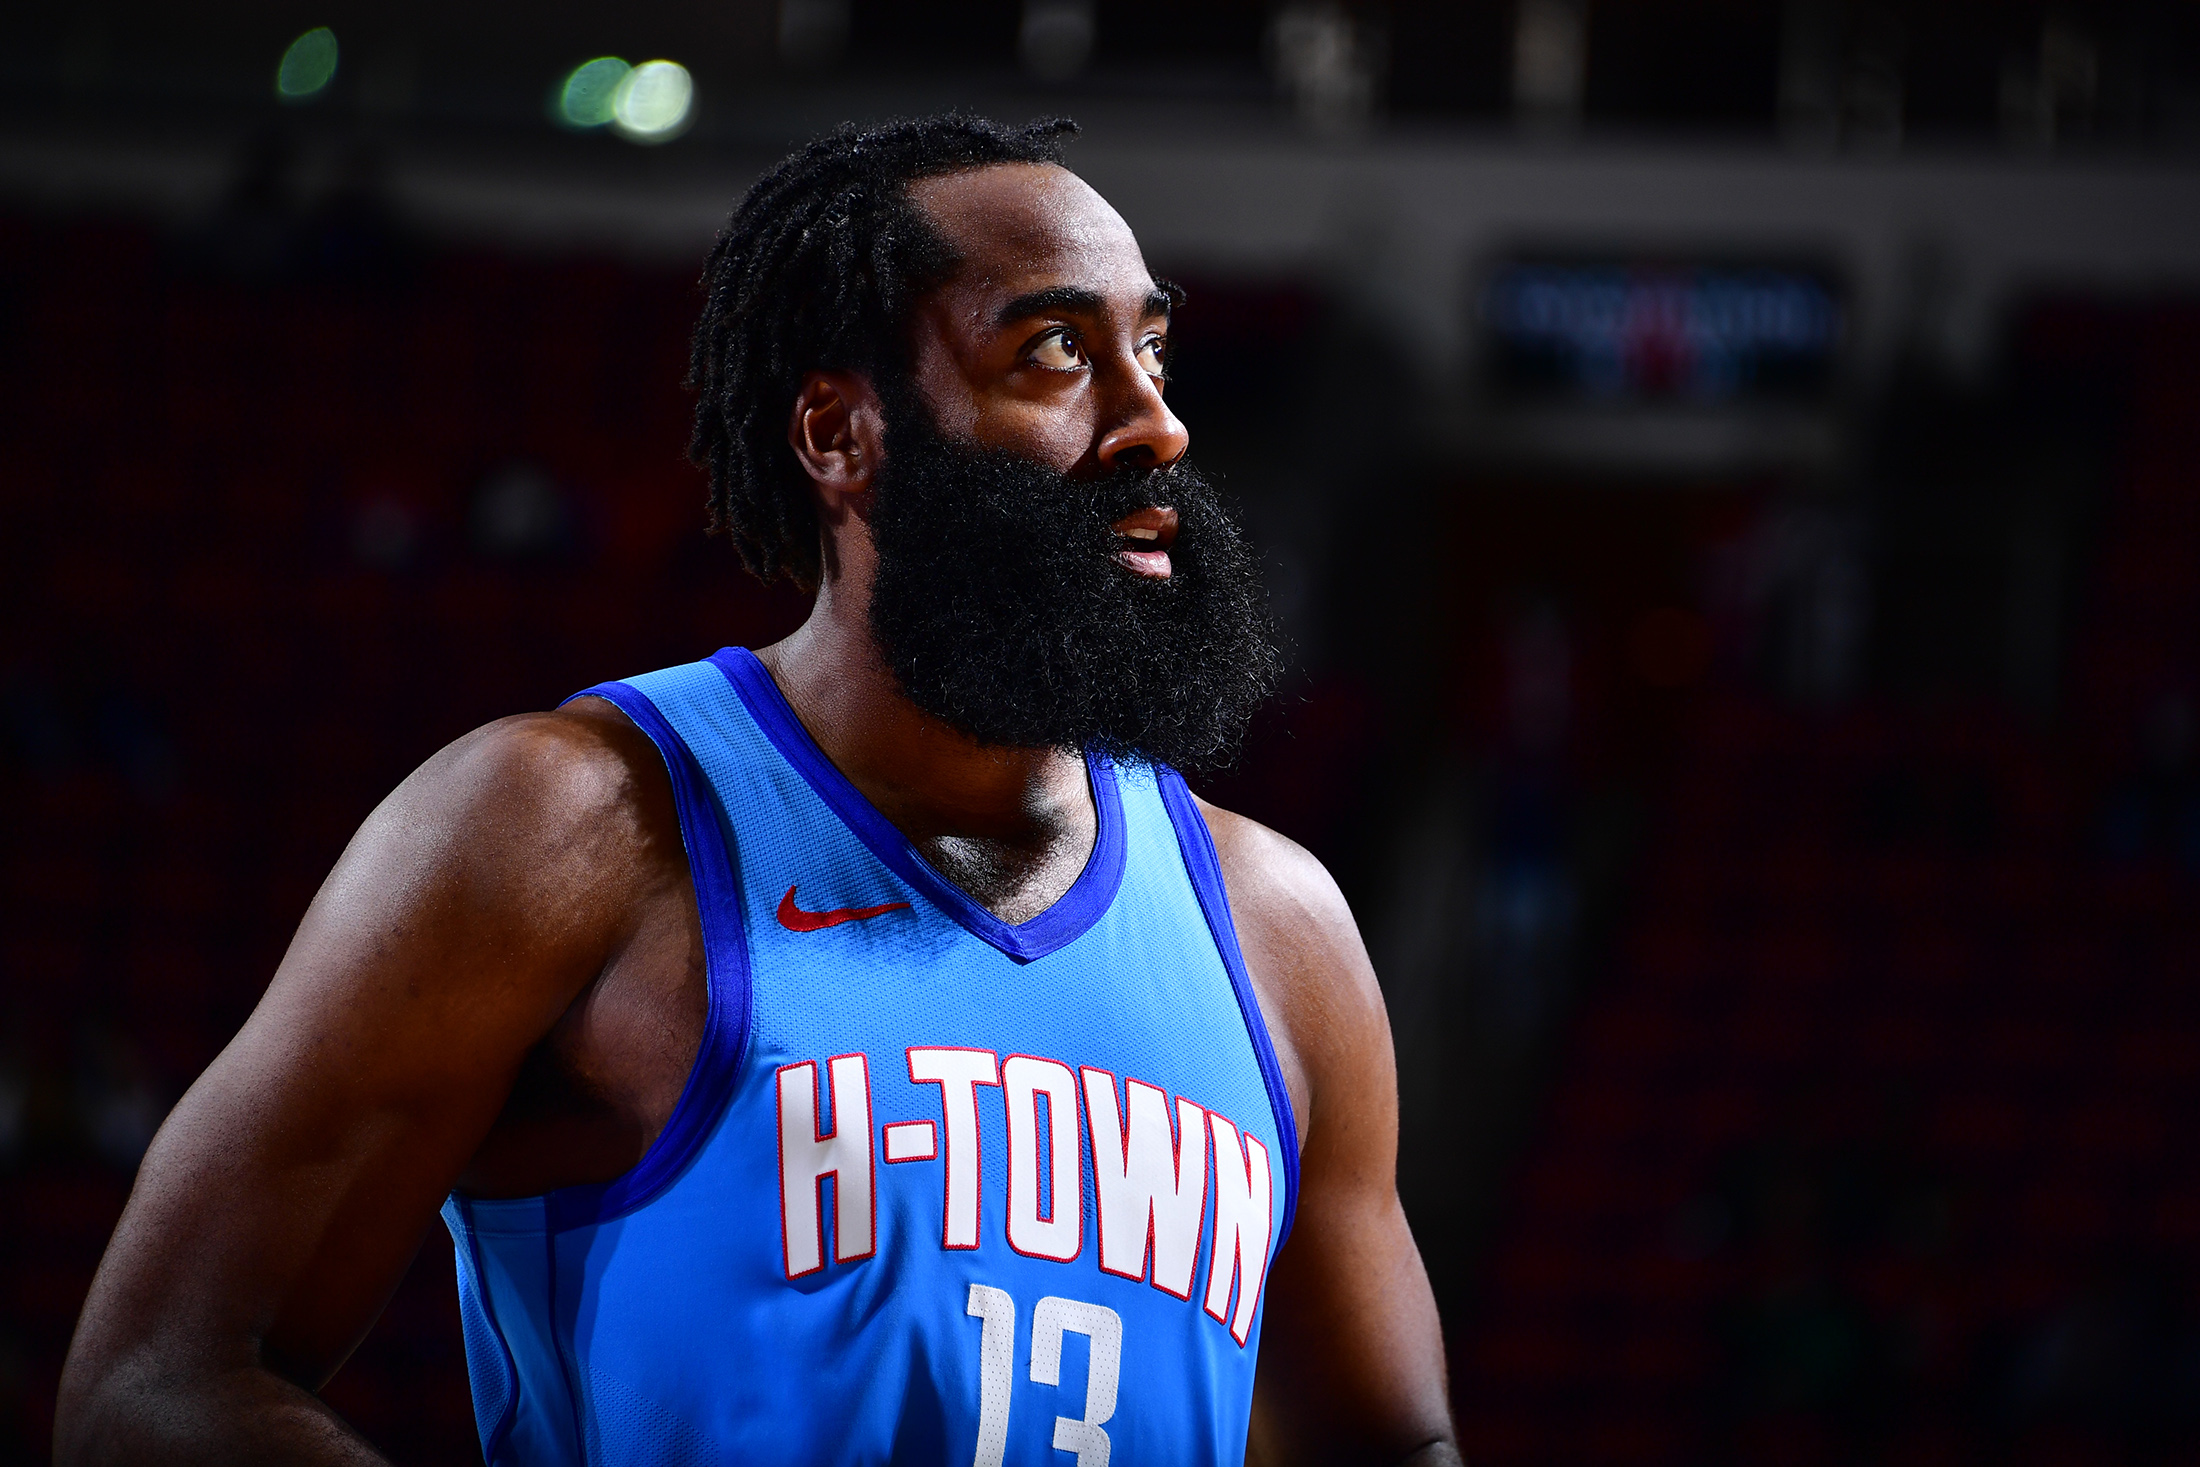 Is James Harden headed back to Houston Rockets after Game 7 loss